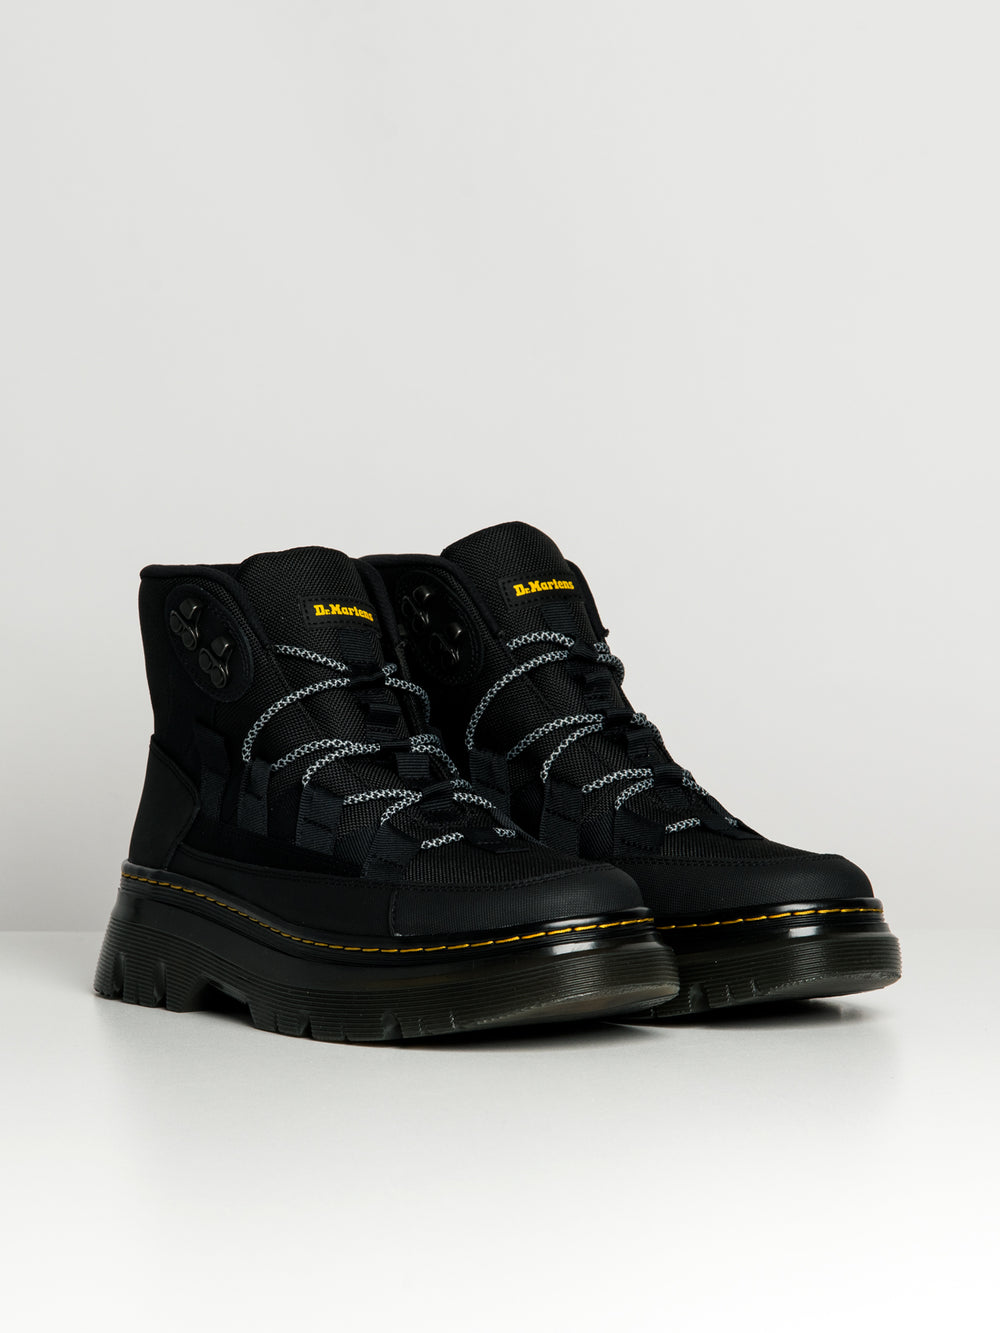 MENS DR MARTENS BOURY EXTRA TOUGH 50/50 BOOT - CLEARANCE